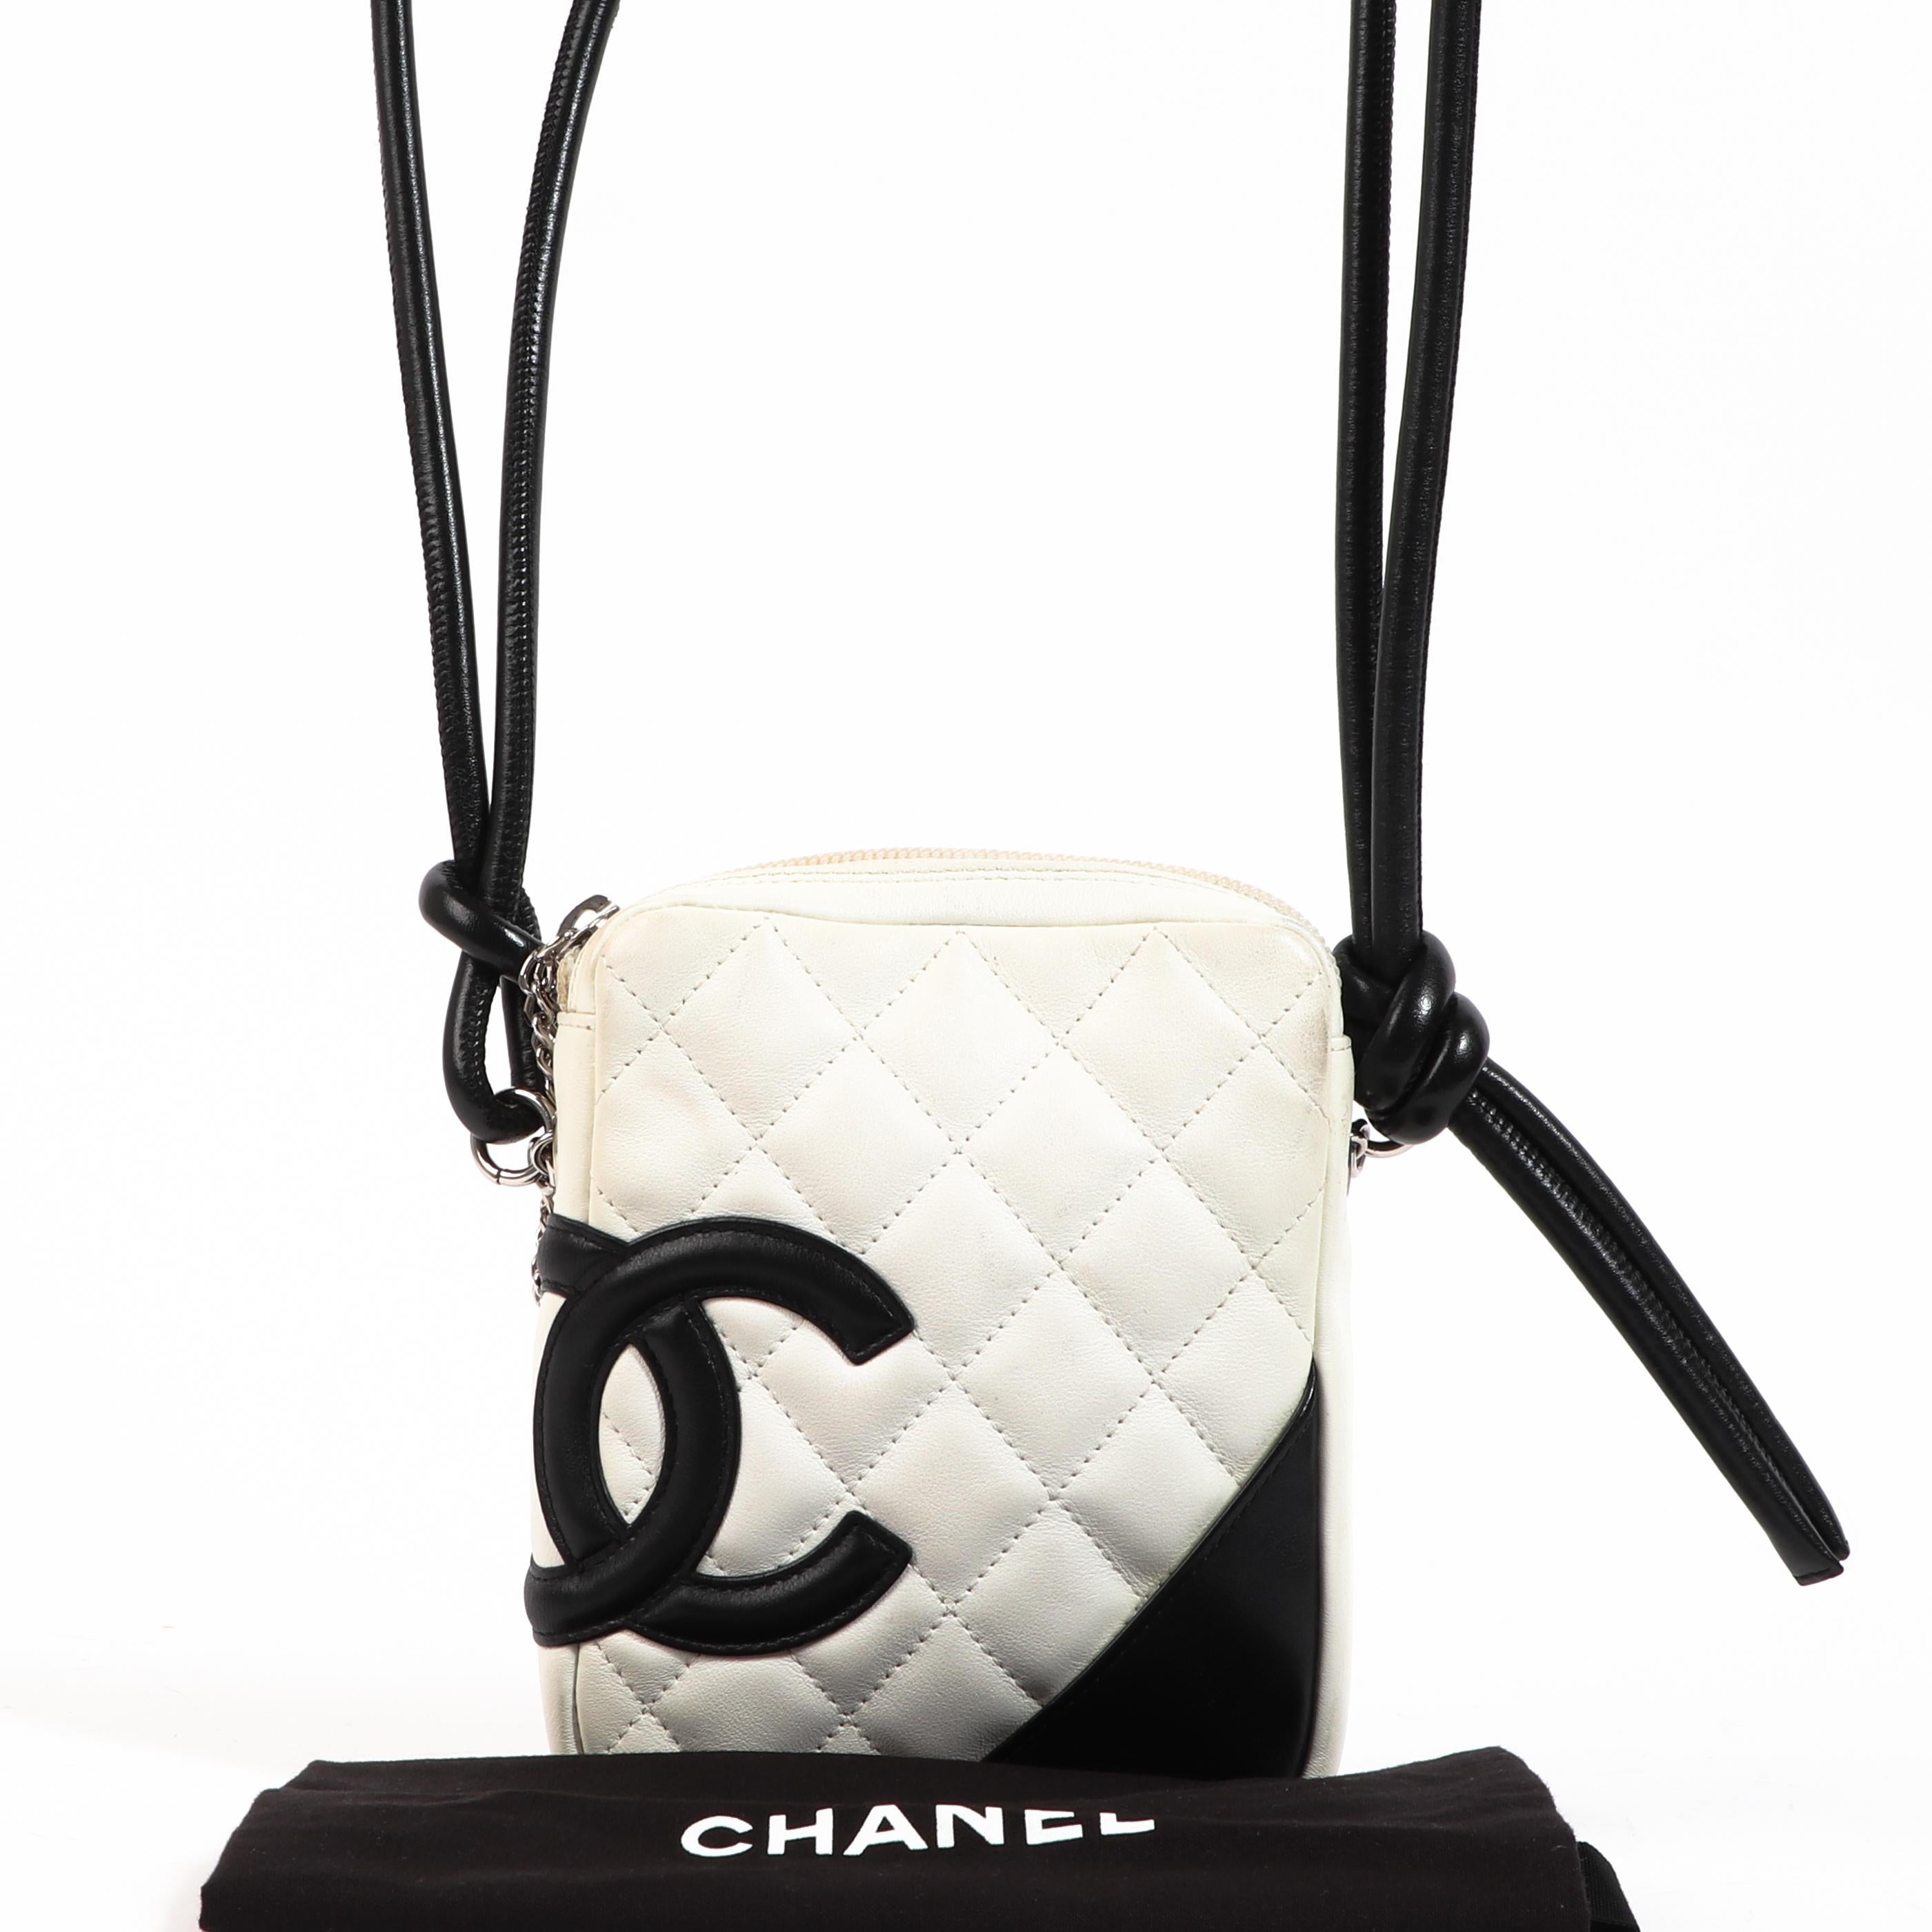 Chanel Black and White Cambon Ligne Crossbody Bag

This iconic crossbody bag by Chanel is crafted out of cream colored leather and finished off with contrasting black detailing and rolled leather shoulder straps.

Contrasting hot pink fabric lining.